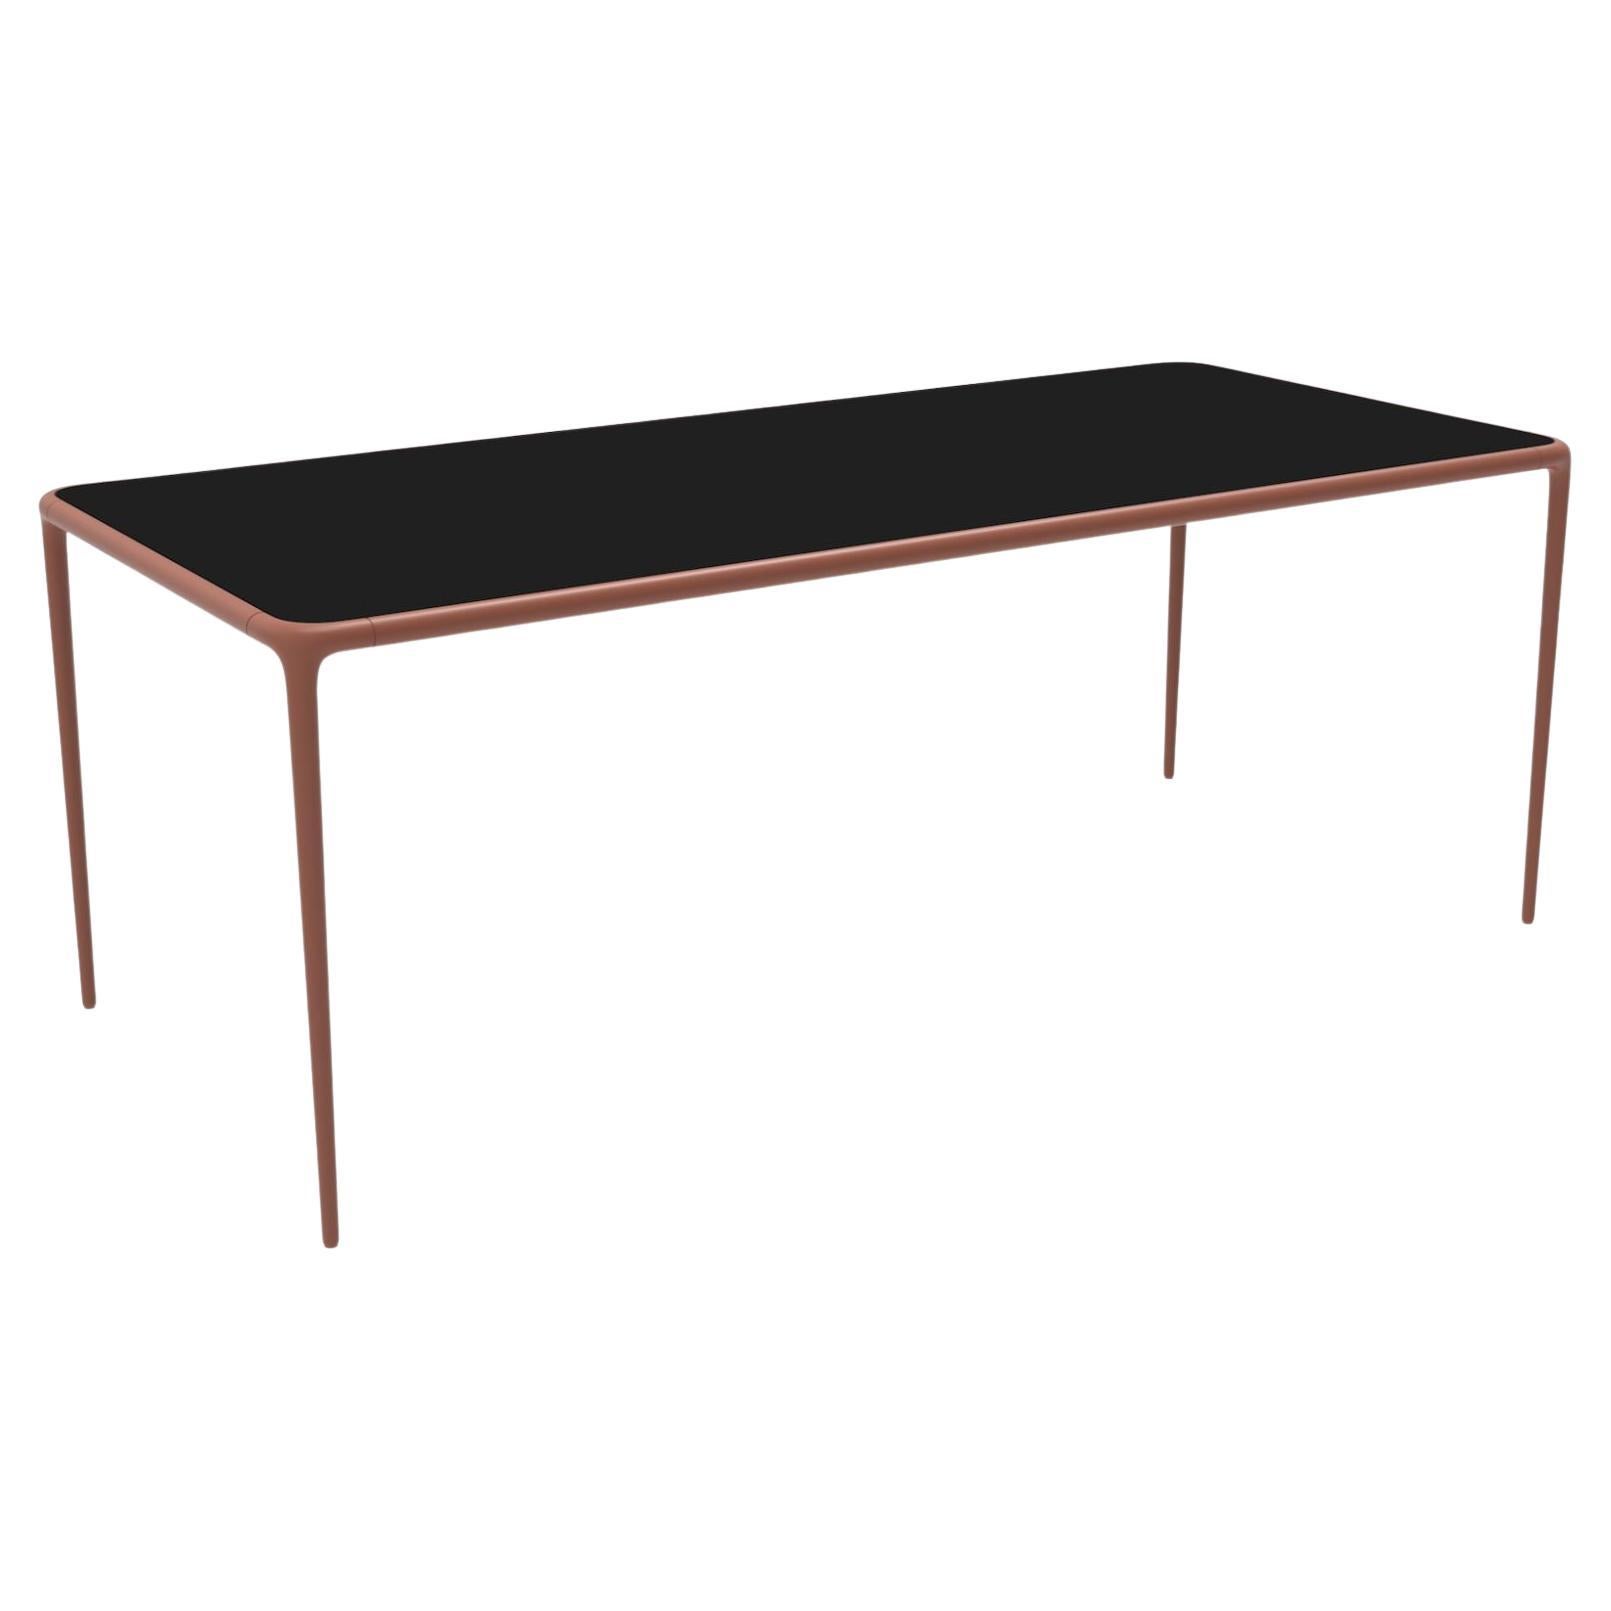 Xaloc Salmon Glass Top Table 200 by Mowee For Sale